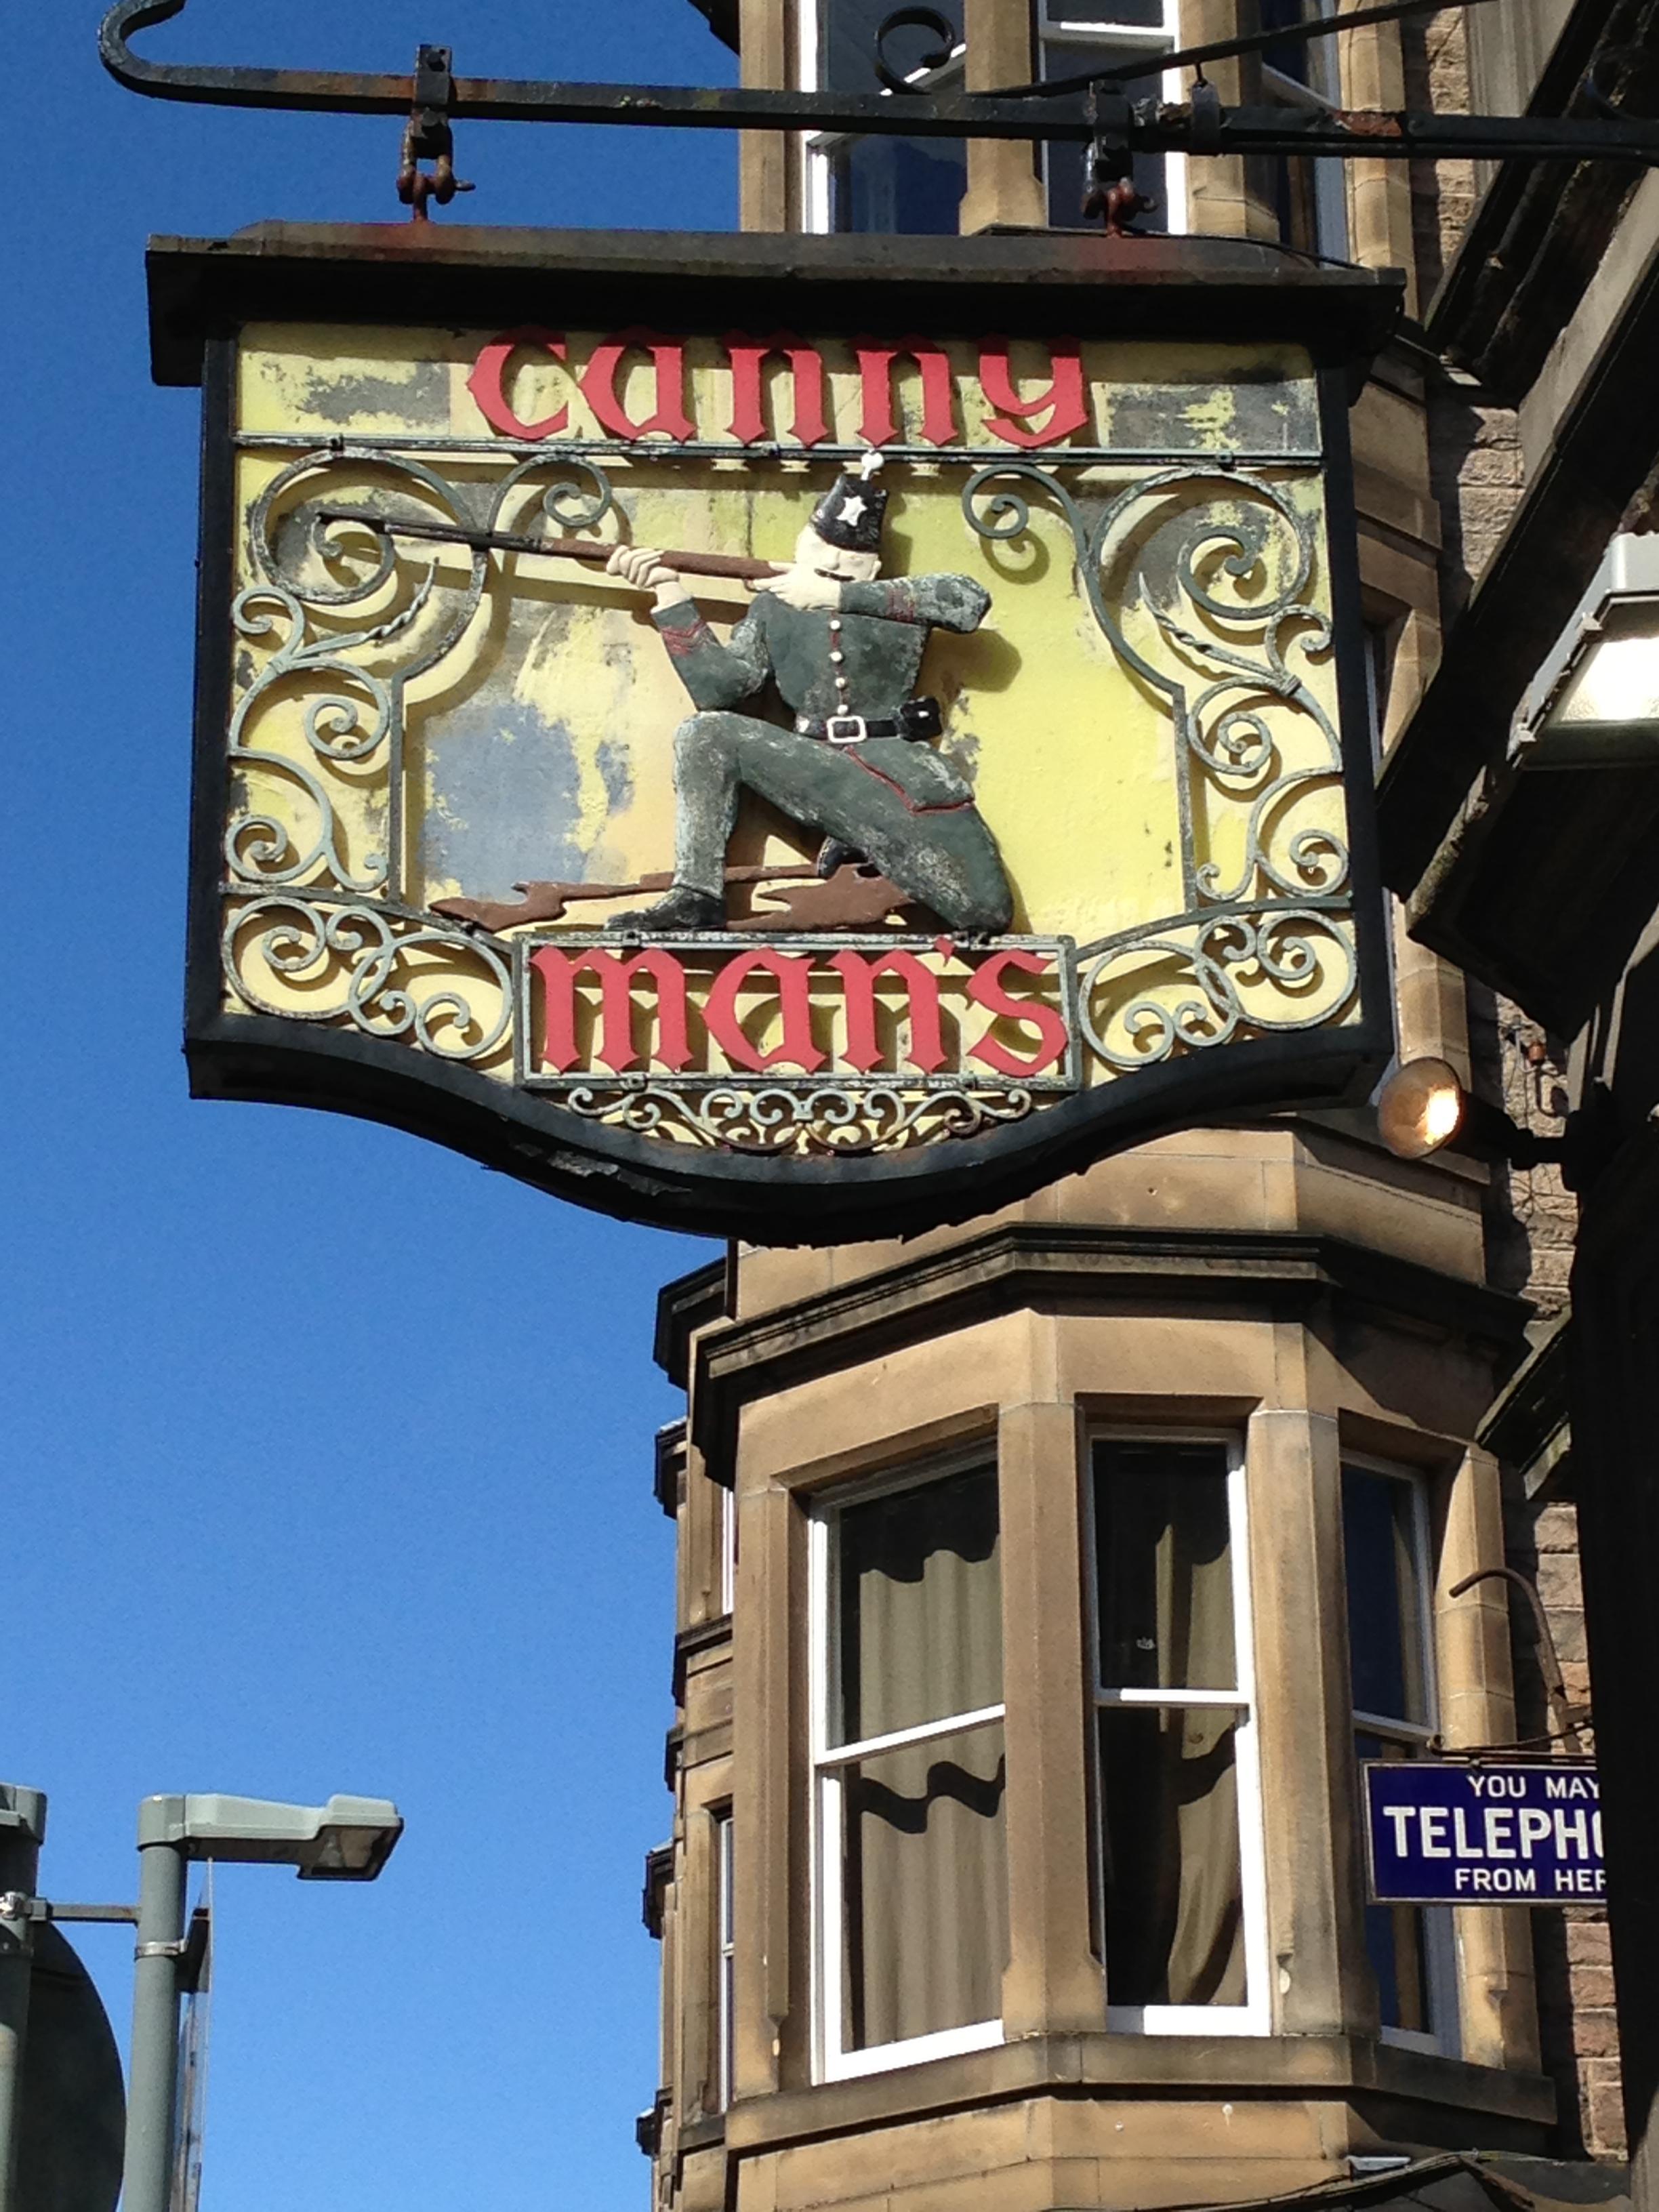 Cover image of this place The Canny Man's